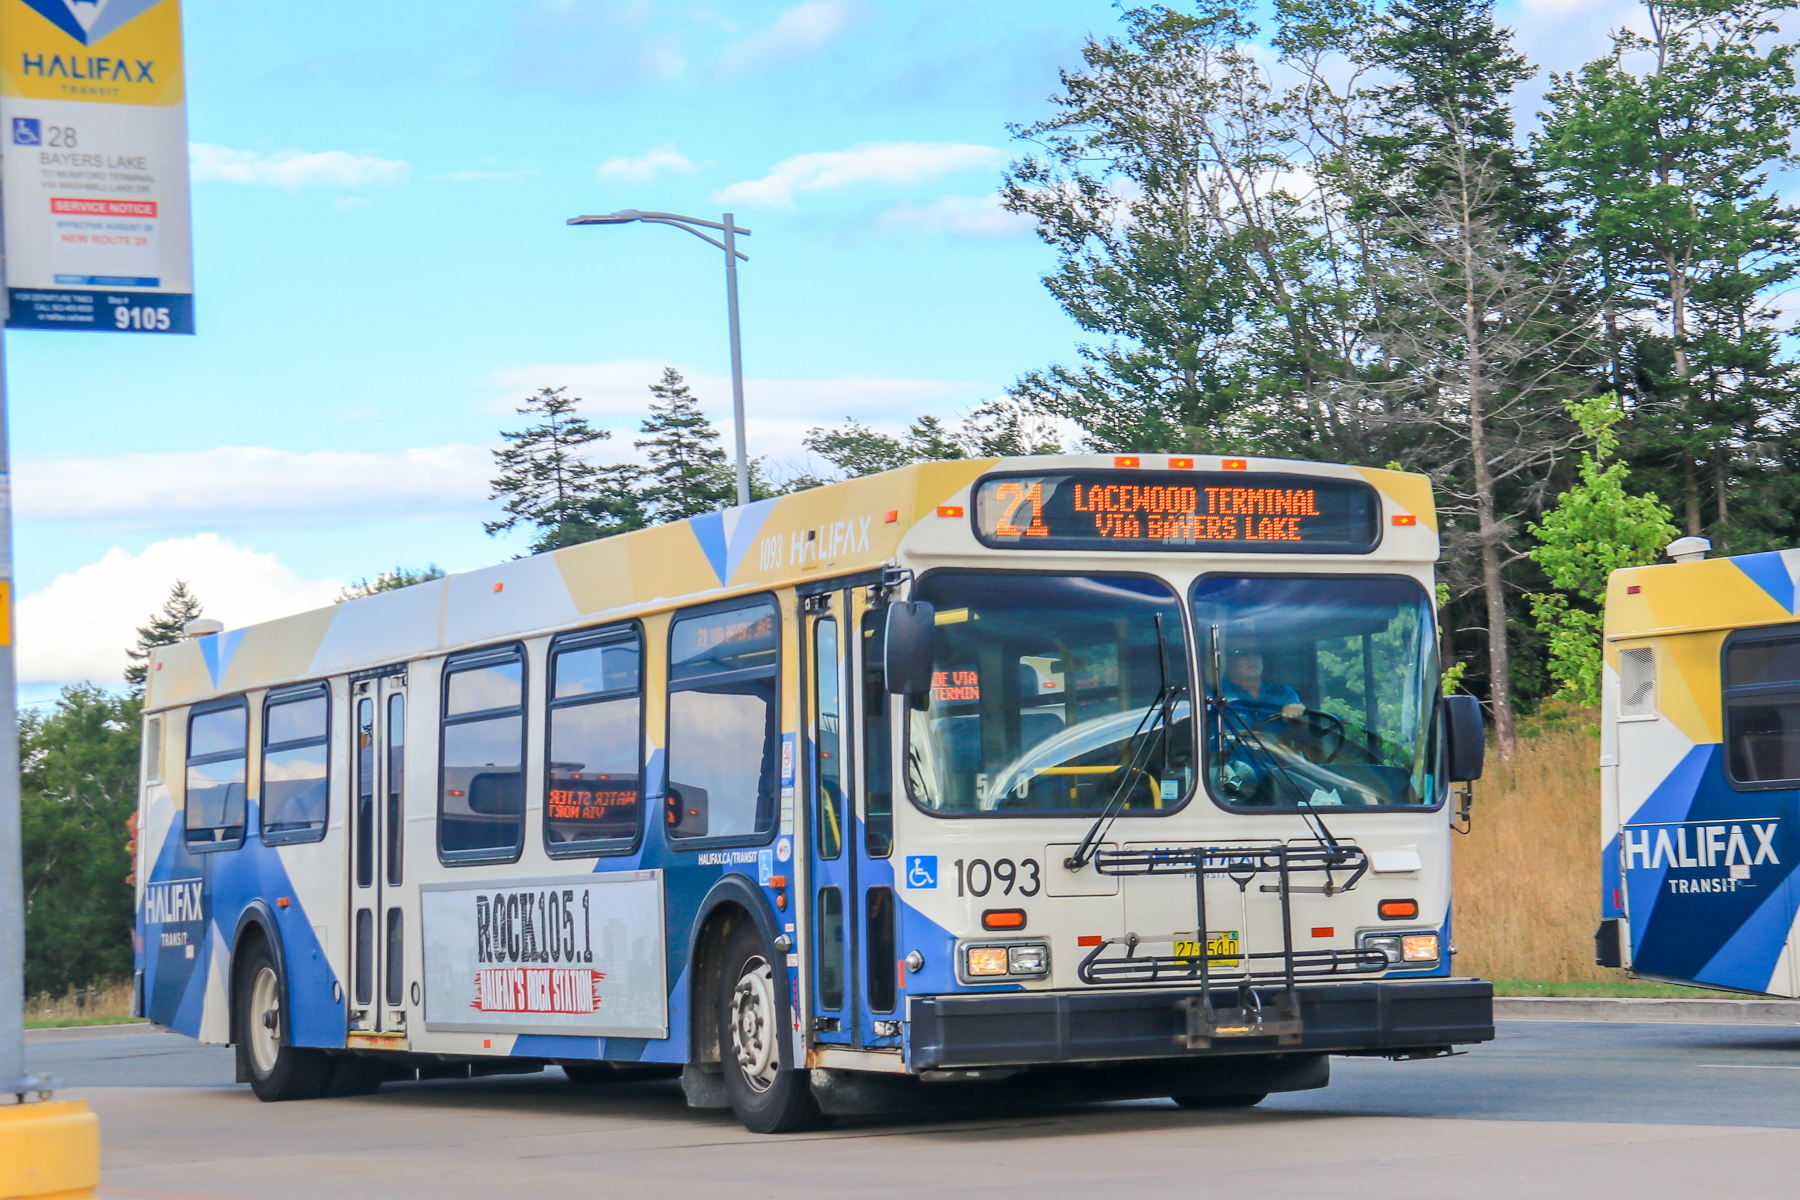 A photo of a Halifax Transit bus.